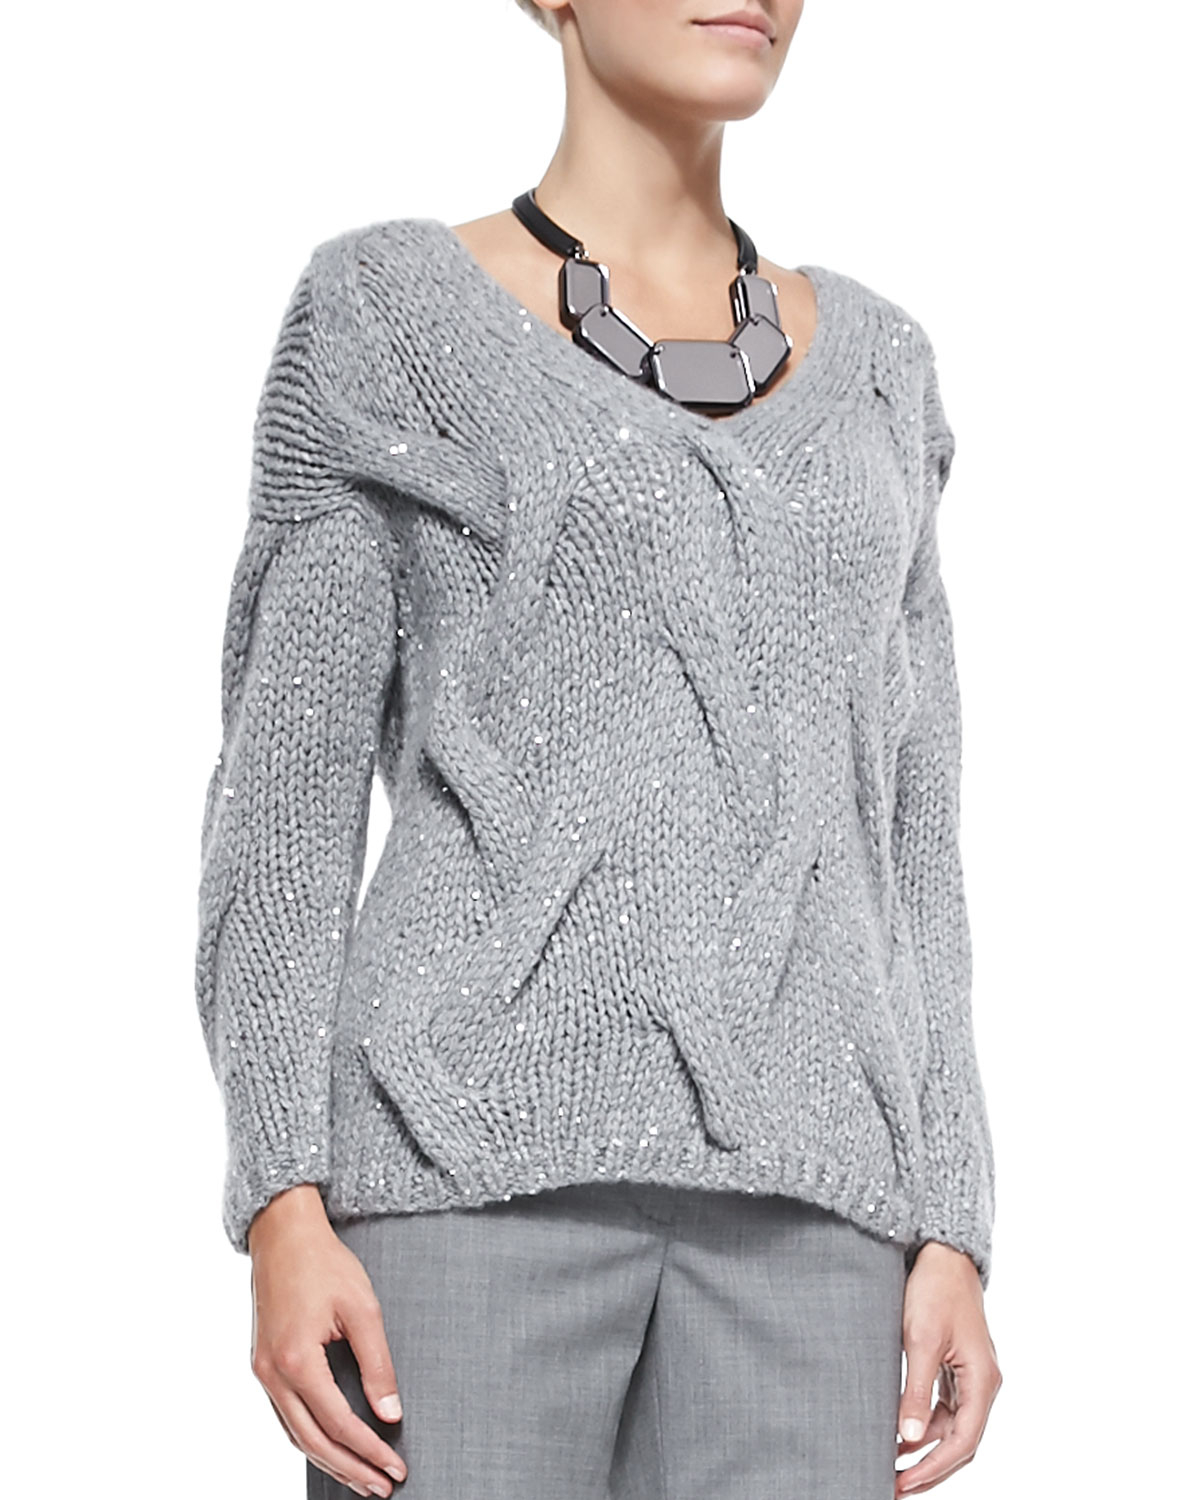 Lyst - Lafayette 148 New York V-neck Cashmere-blend Cable Sweater in Gray